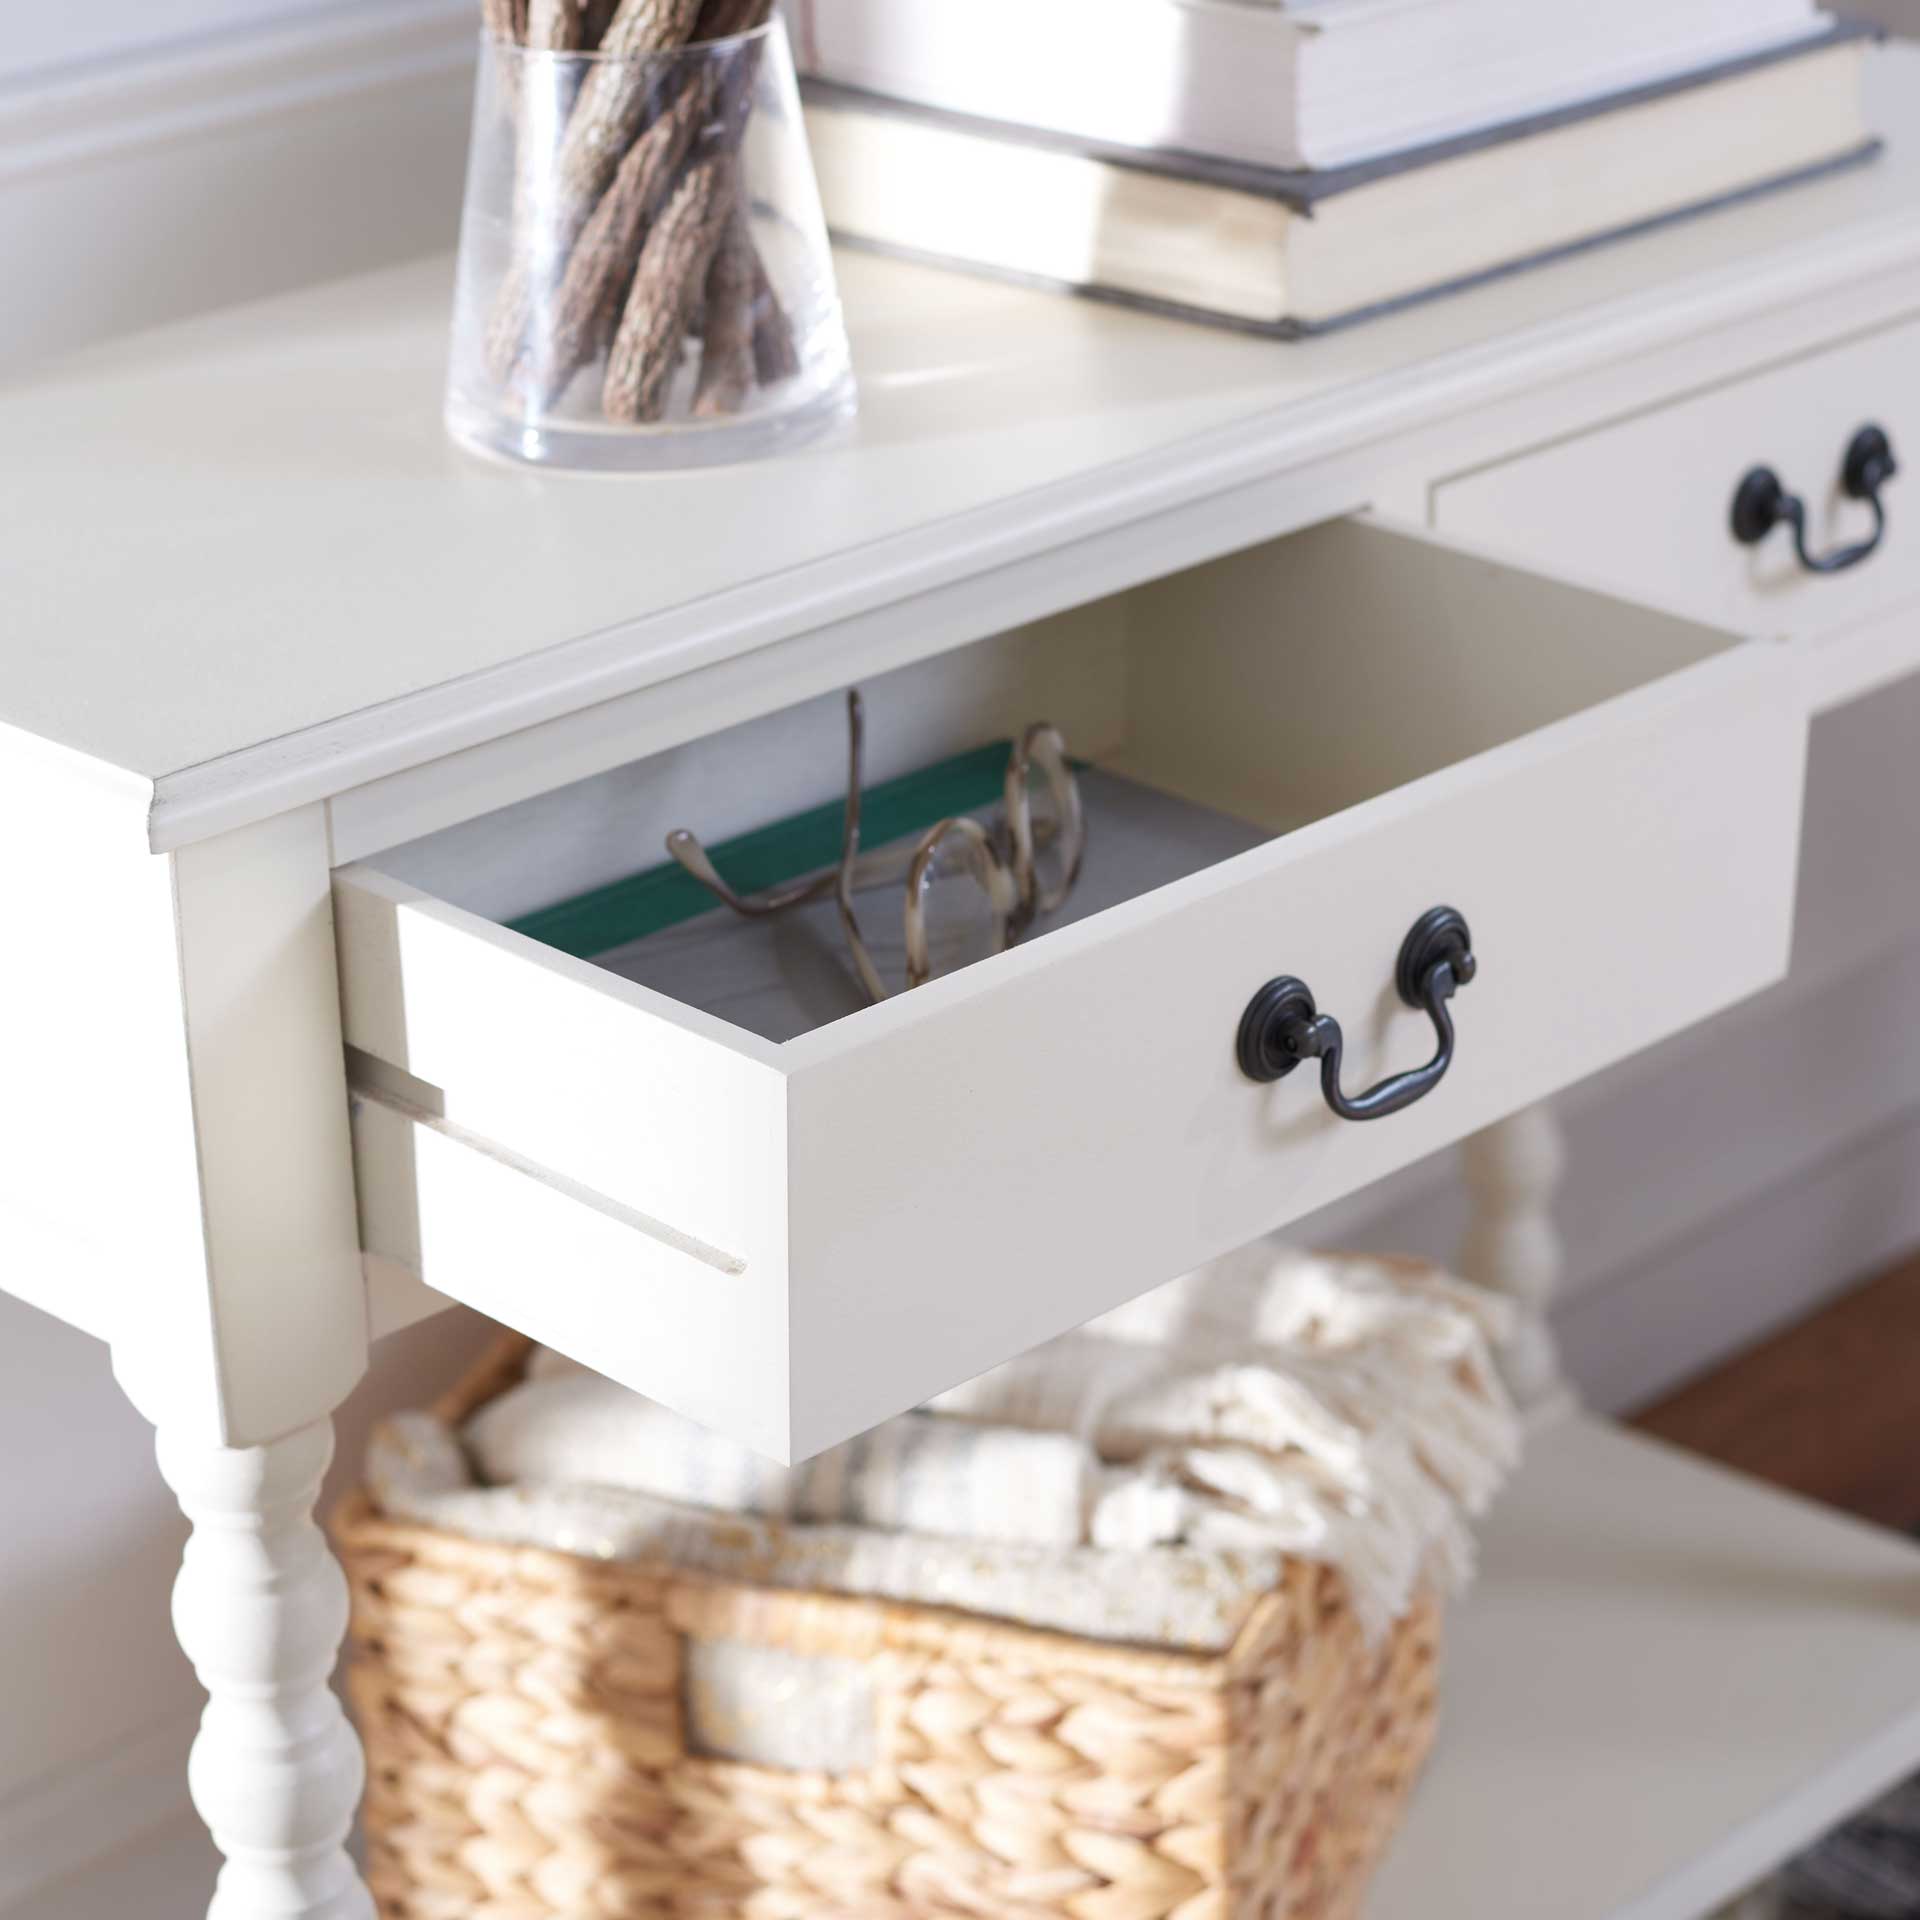 Atalia 2 Drawer Console Table Distressed White